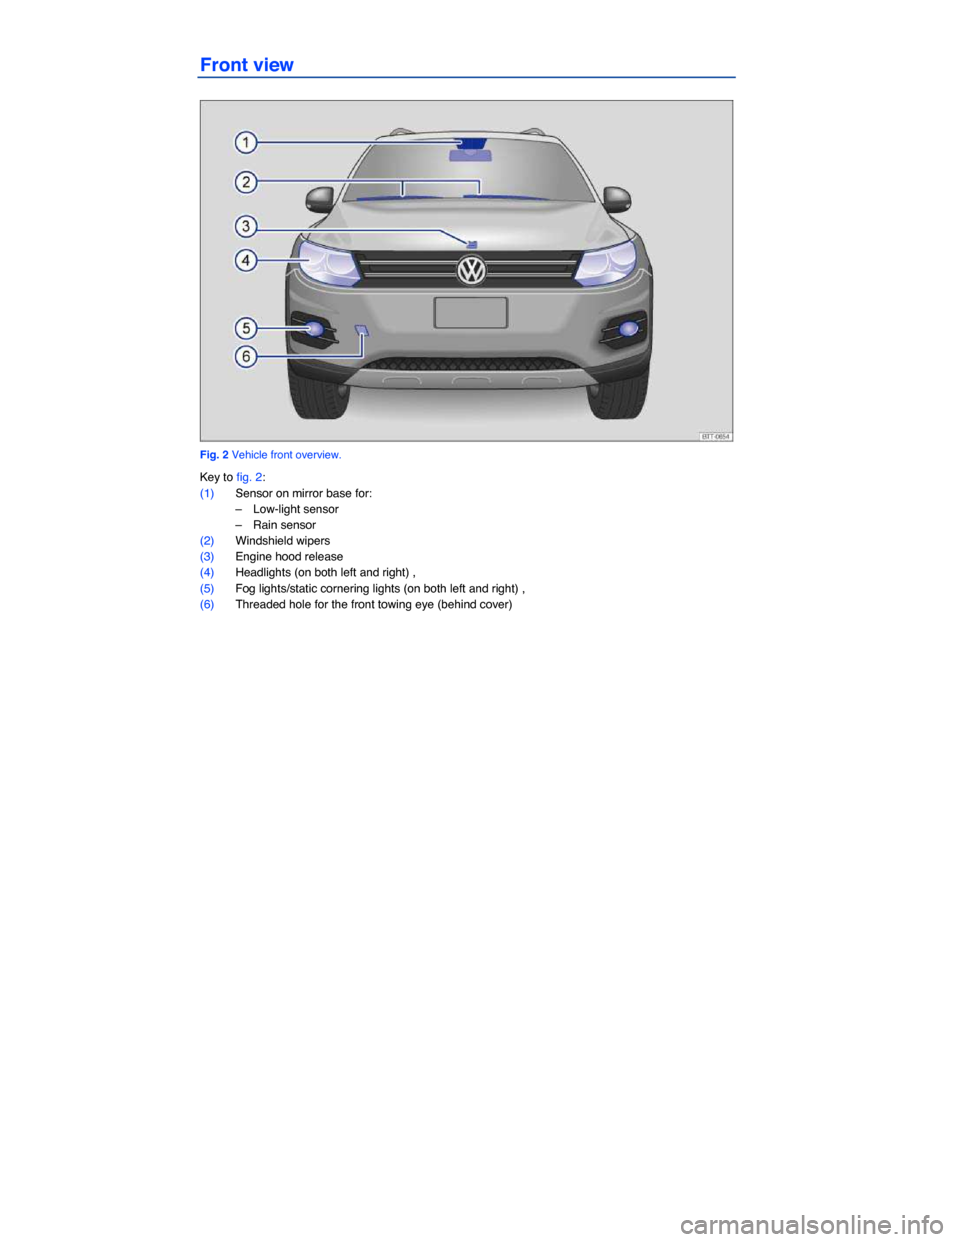 VOLKSWAGEN TIGUAN 2014 1.G Owners Manual  
 
Front view 
 
Fig. 2 Vehicle front overview. 
Key to fig. 2: 
(1) Sensor on mirror base for: 
–  Low-light sensor  
–  Rain sensor  
(2) Windshield wipers  
(3) Engine hood release  
(4) Headl